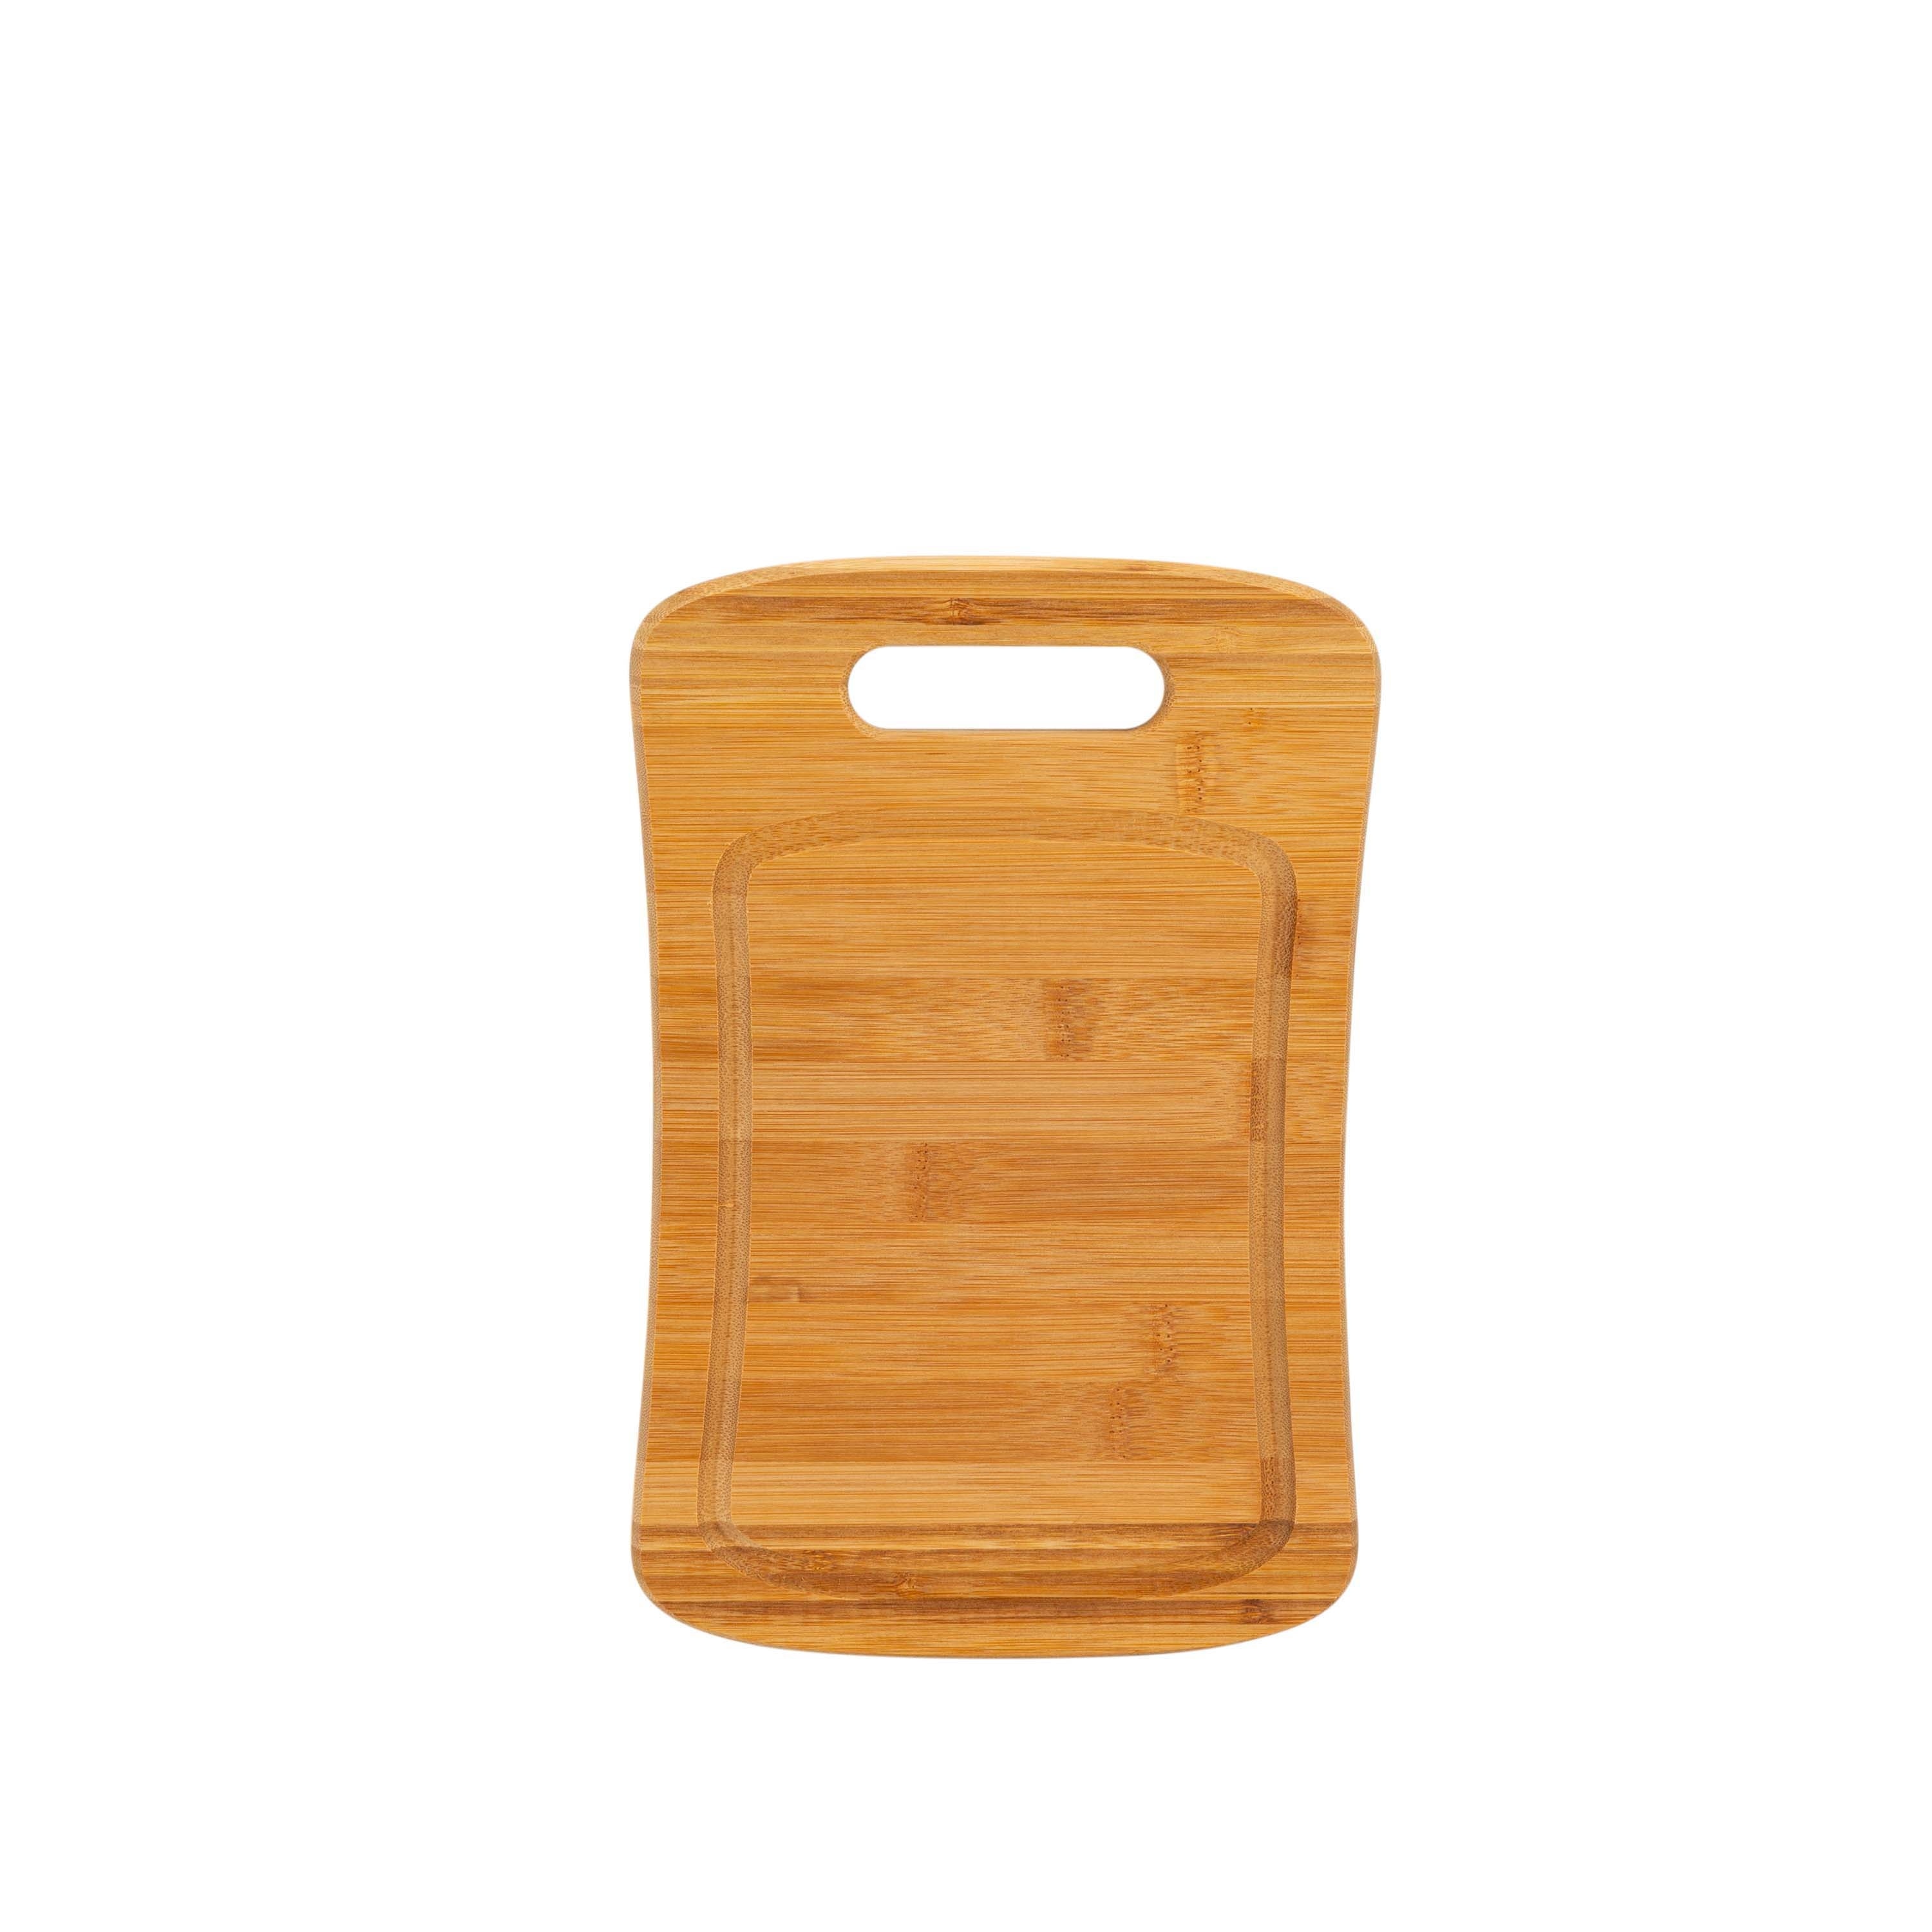 https://ak1.ostkcdn.com/images/products/is/images/direct/42ece68d46244cd6d75c0ffe2eaa8e9d3d7a0cfd/Kitchen-Details-Curved-Bamboo-Cutting-Board.jpg